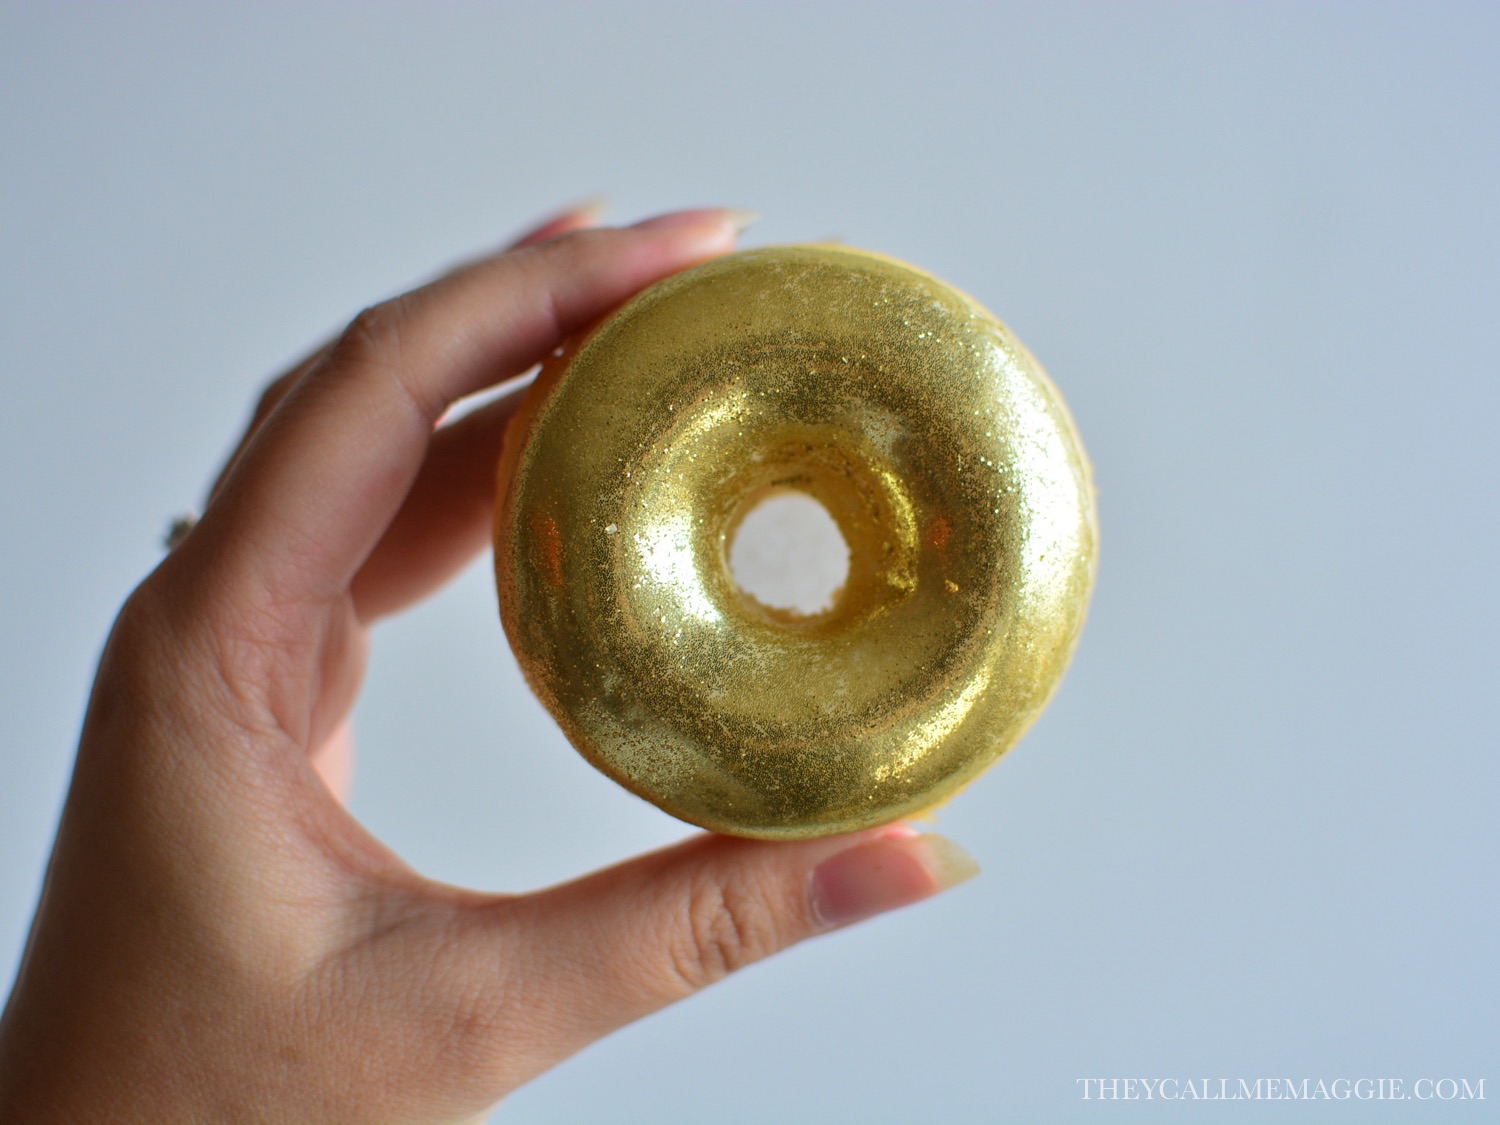  One donut to rule them all. 